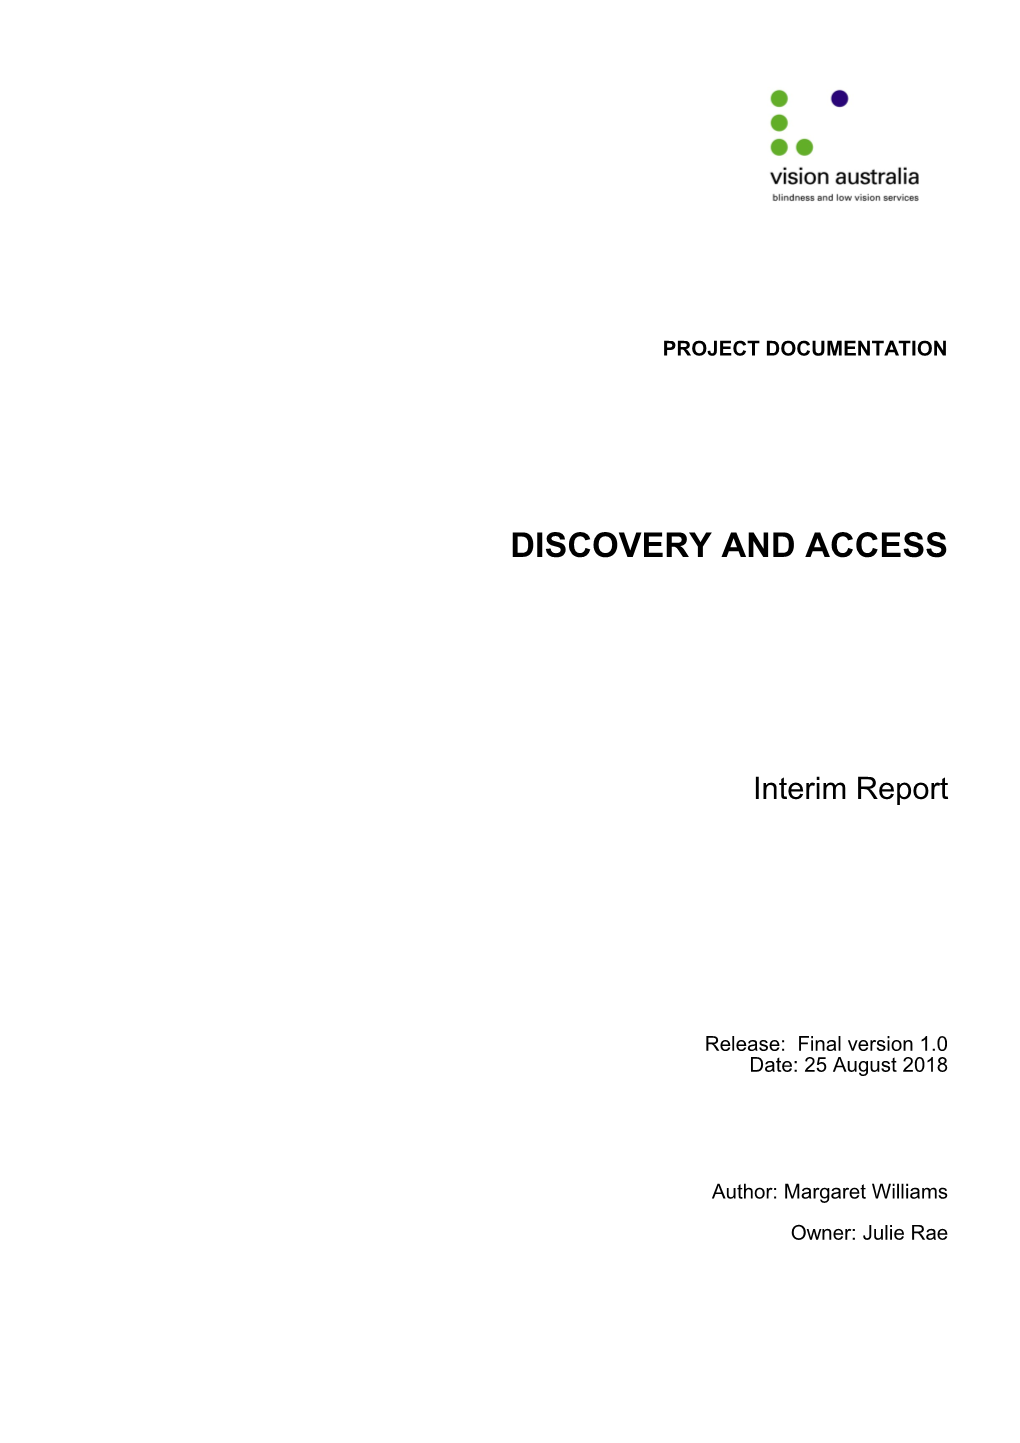 Global Library Discovery and Access